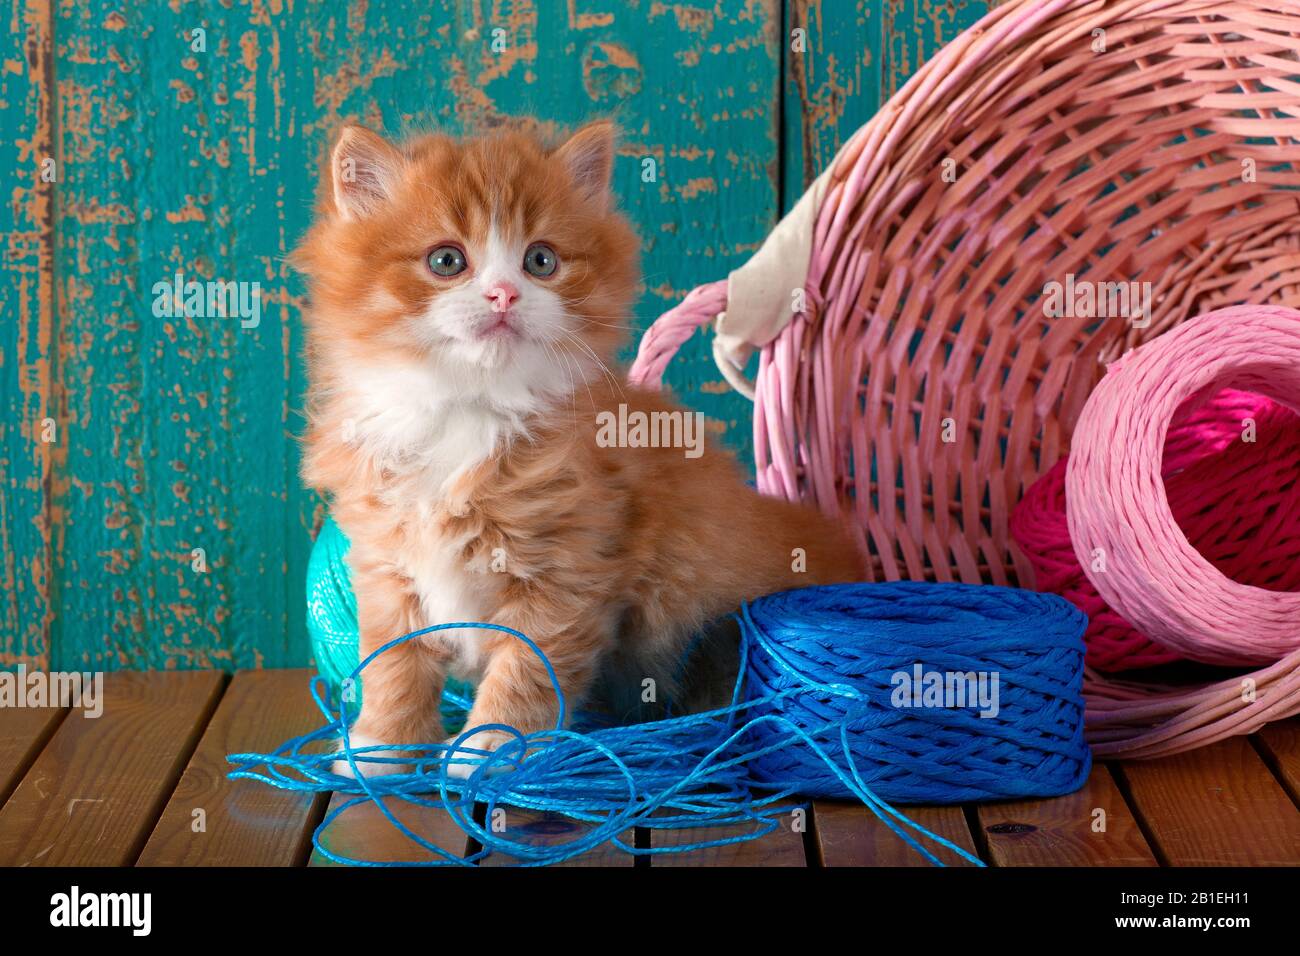 Orange and white kitten sitting by fallen pink basket with balls of strings Stock Photo